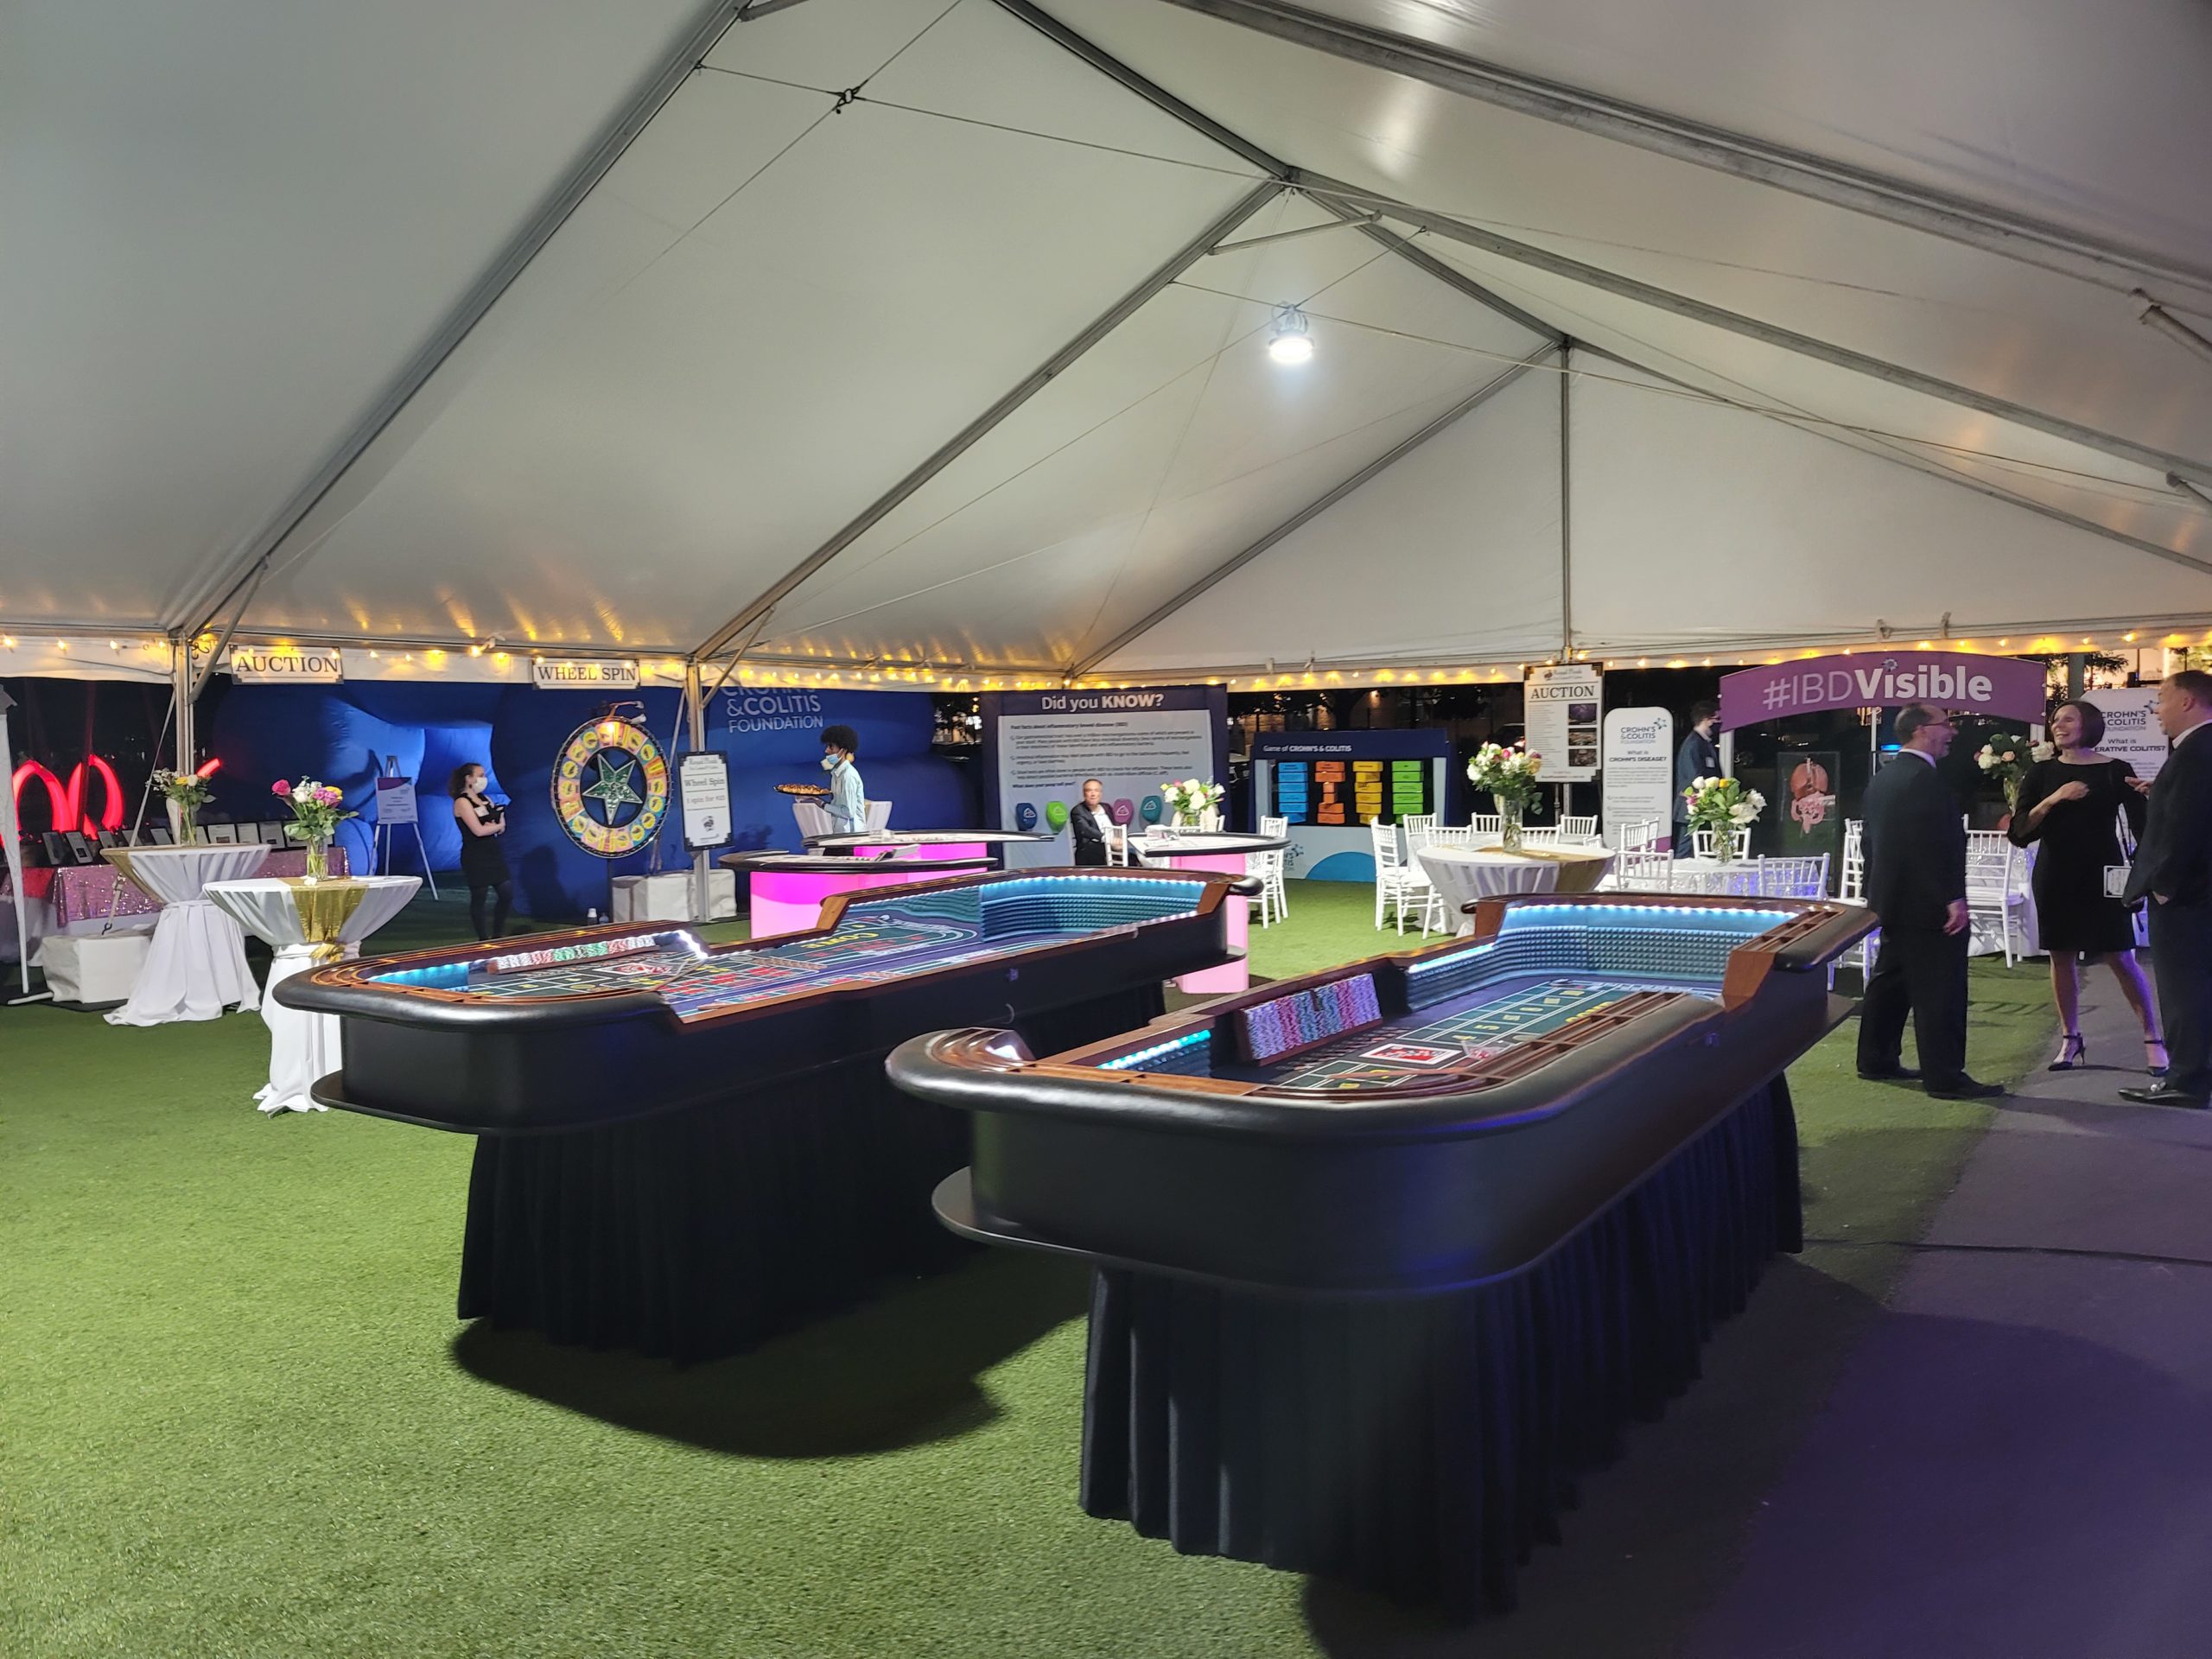 Crohn's and Colitis exhibits under a white tent